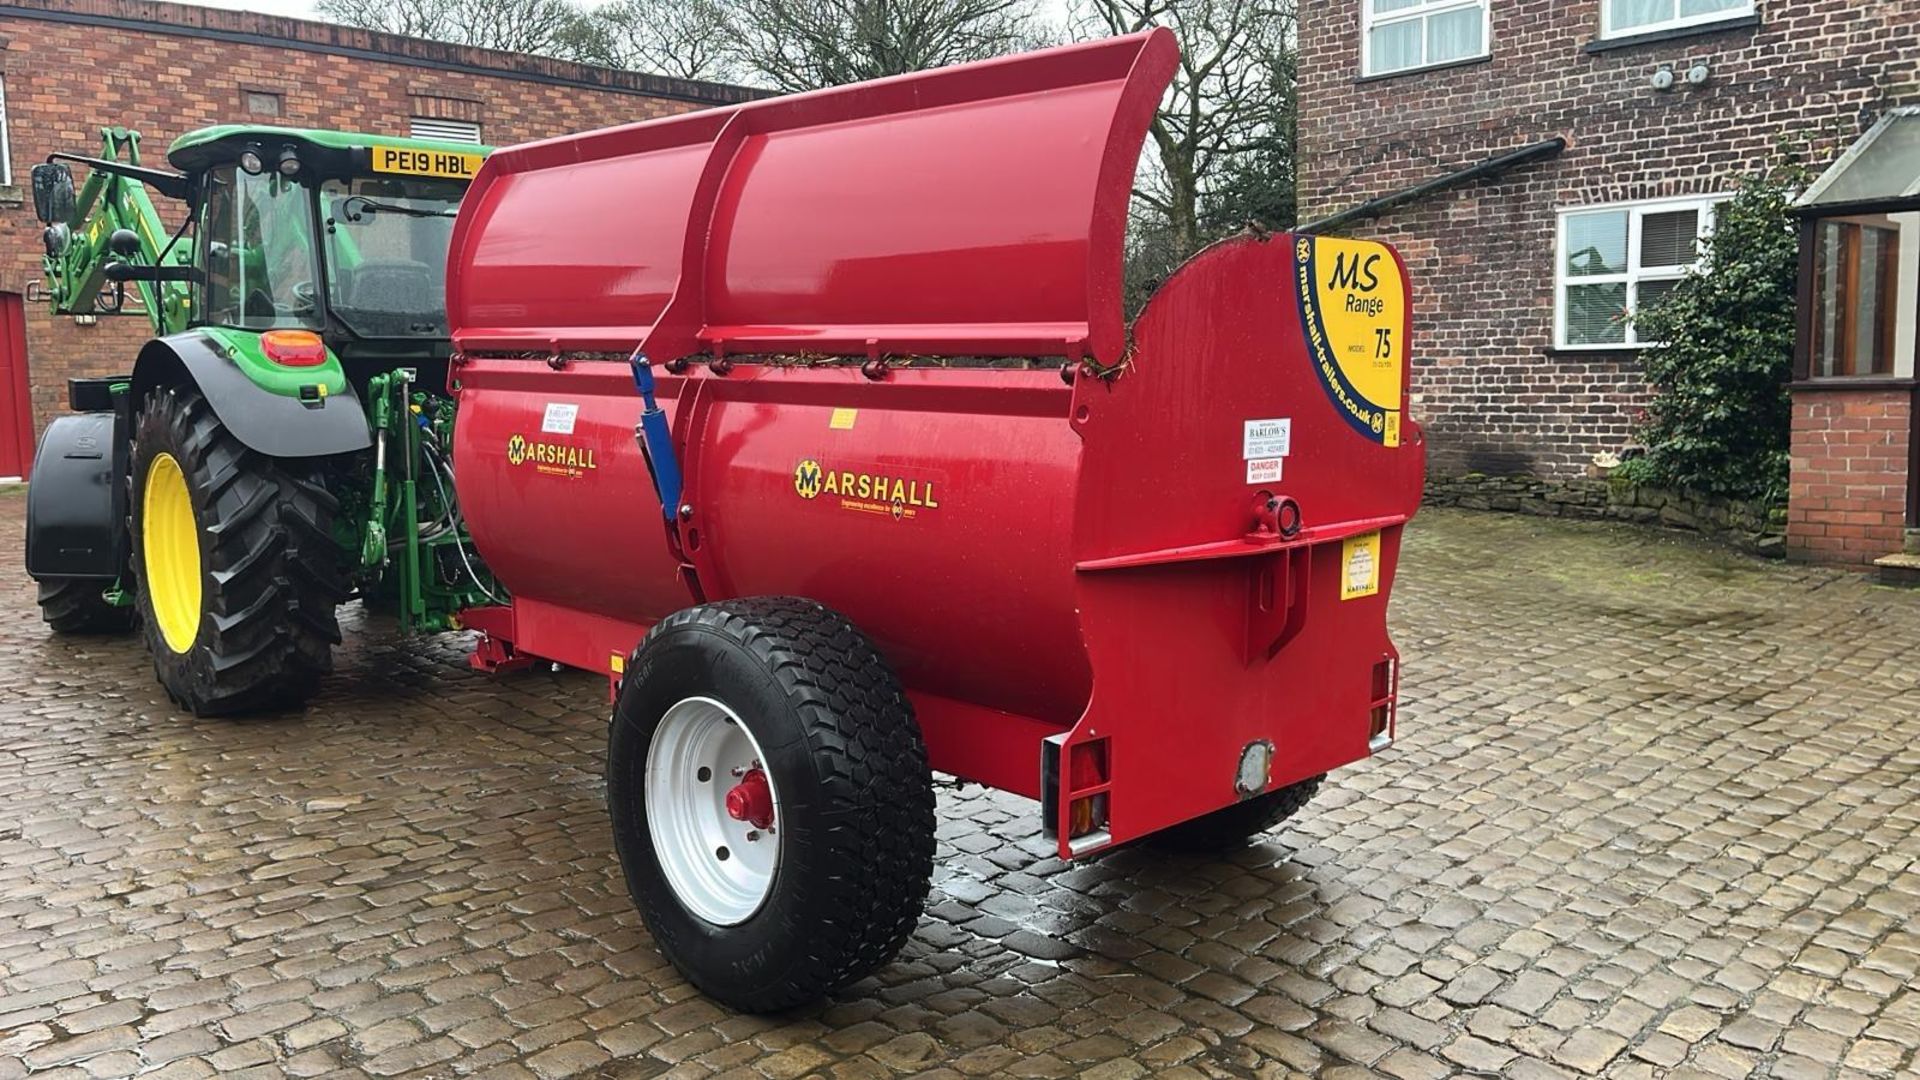 2016 MARSHALL MS 75 ROTARY MANURE SPREADER 7.5 CUBIC YARDS CARRYING CAPACITY 5 TONNE SERIAL NUMBER - Image 6 of 13